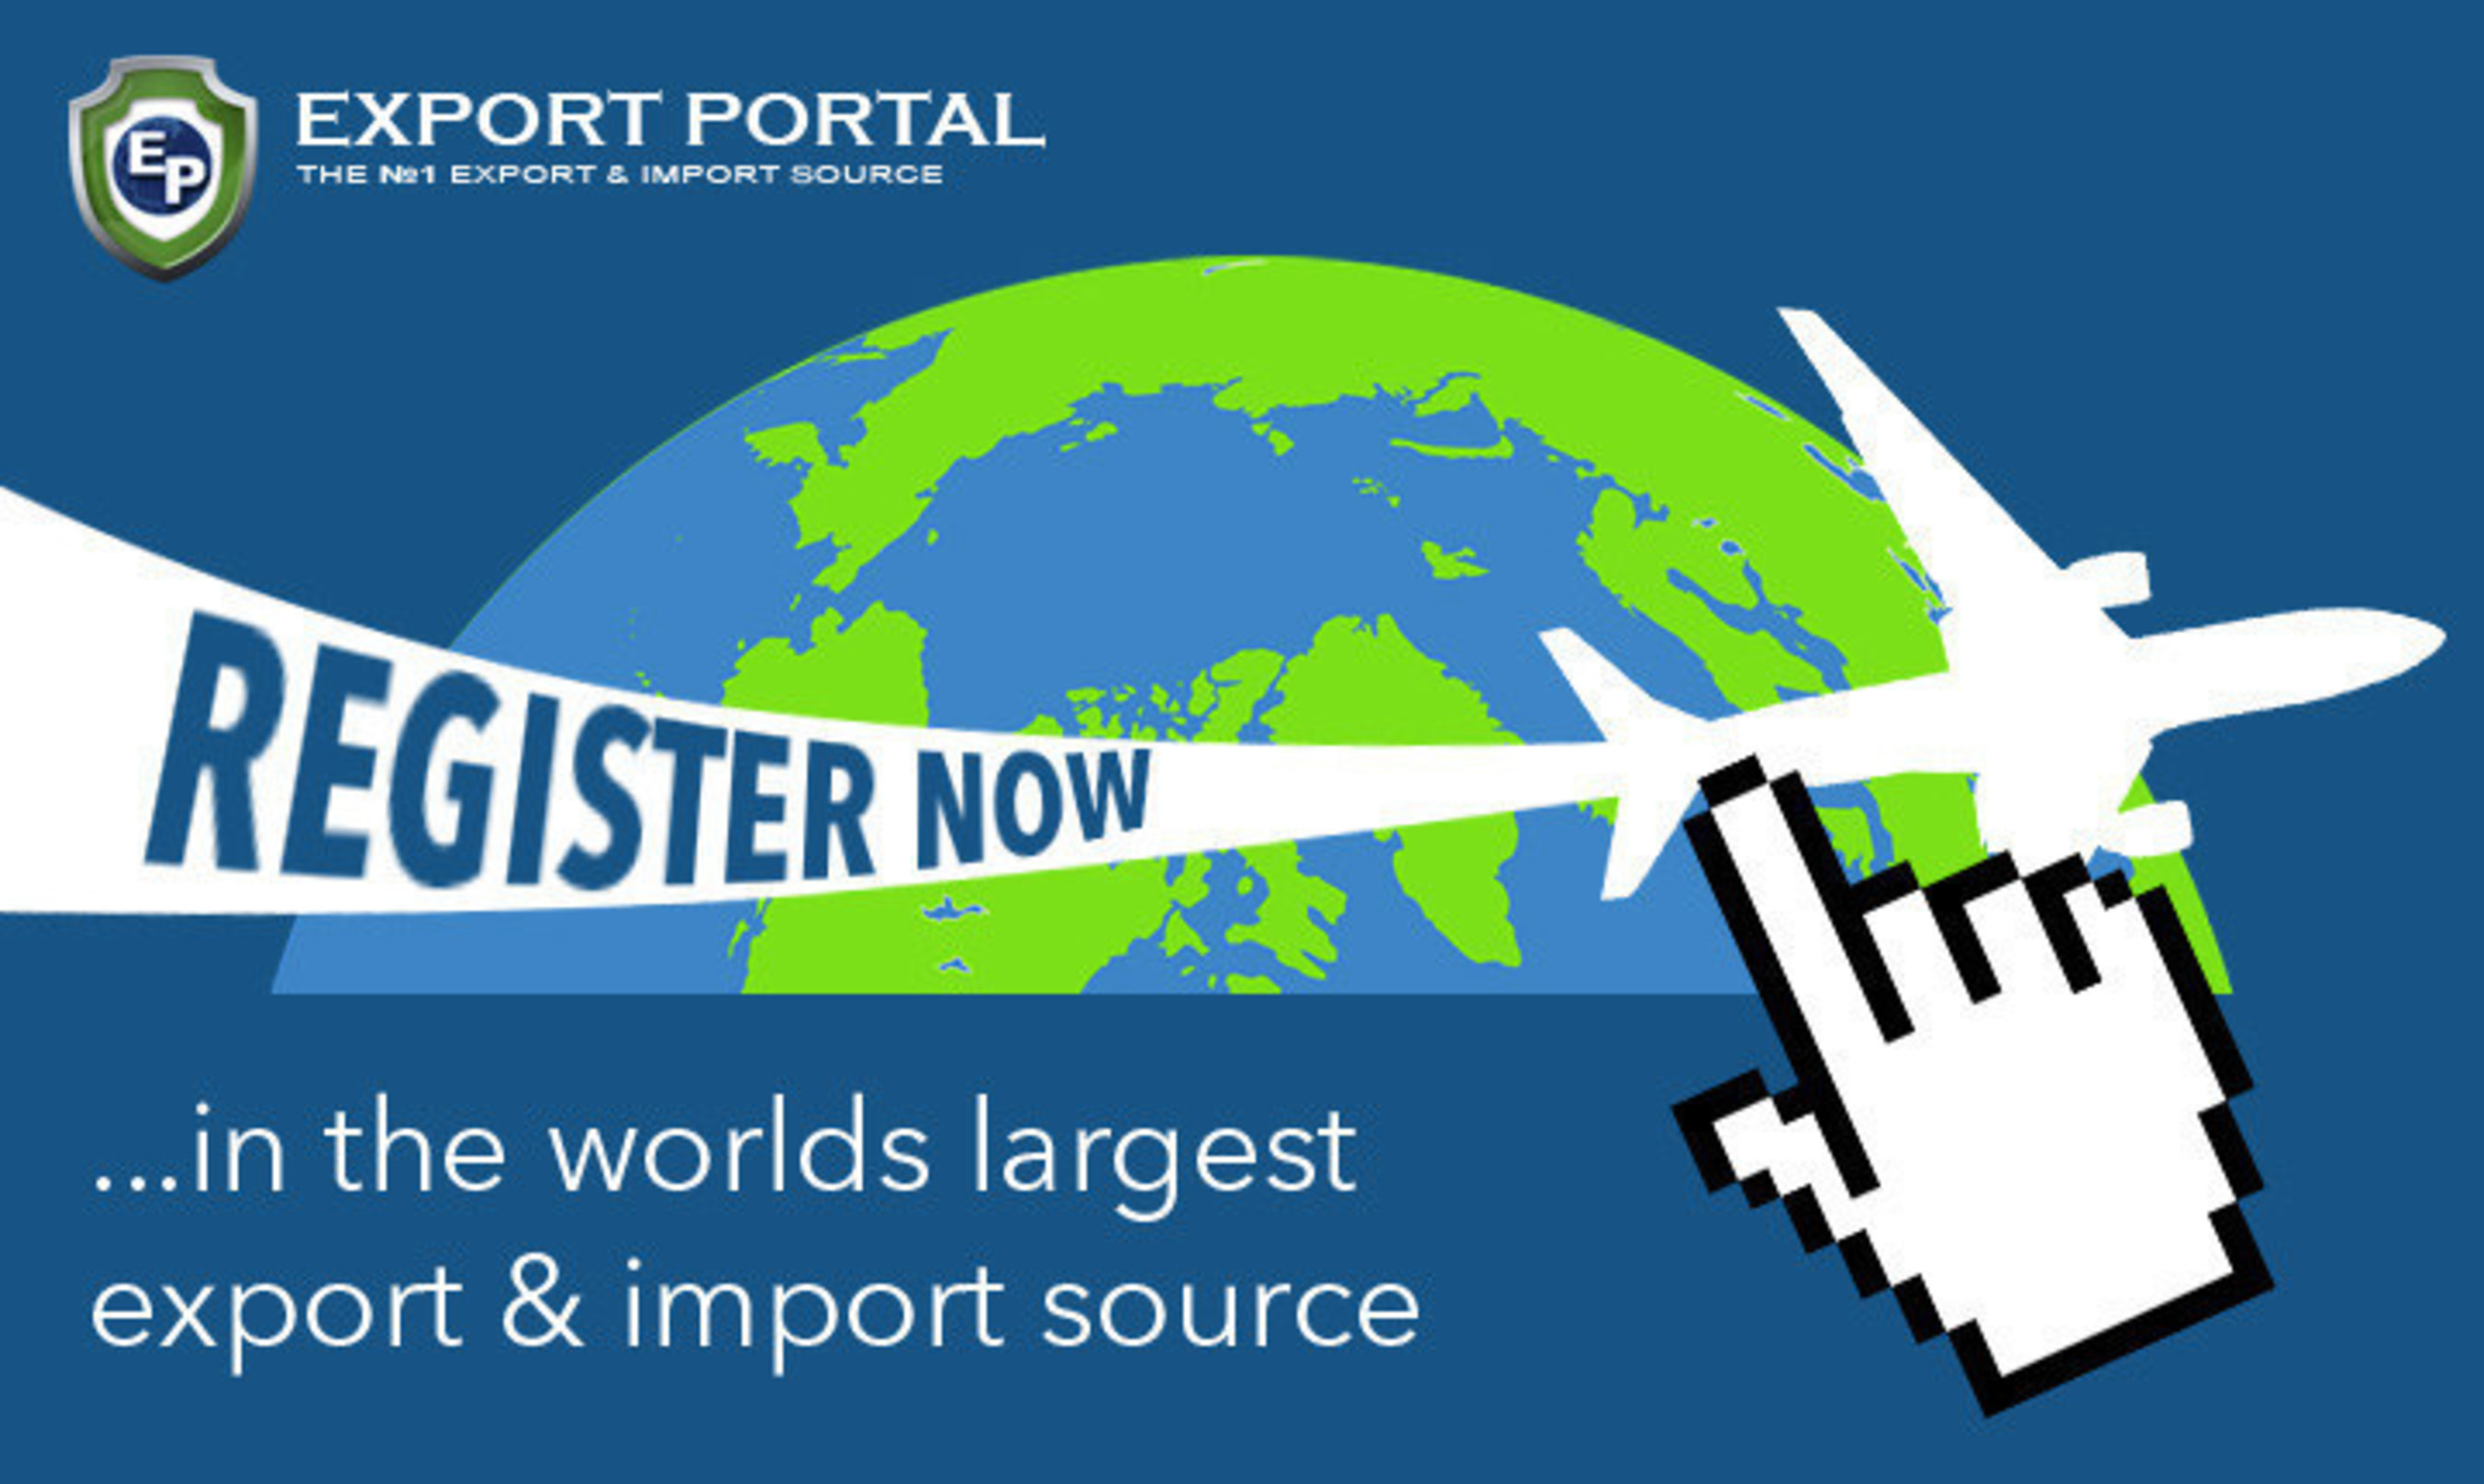 EXPORT PORTAL ANNOUNCES LAUNCHING OF NEW SITE TO HELP BUSINESSES GROW INTERNATIONALLY